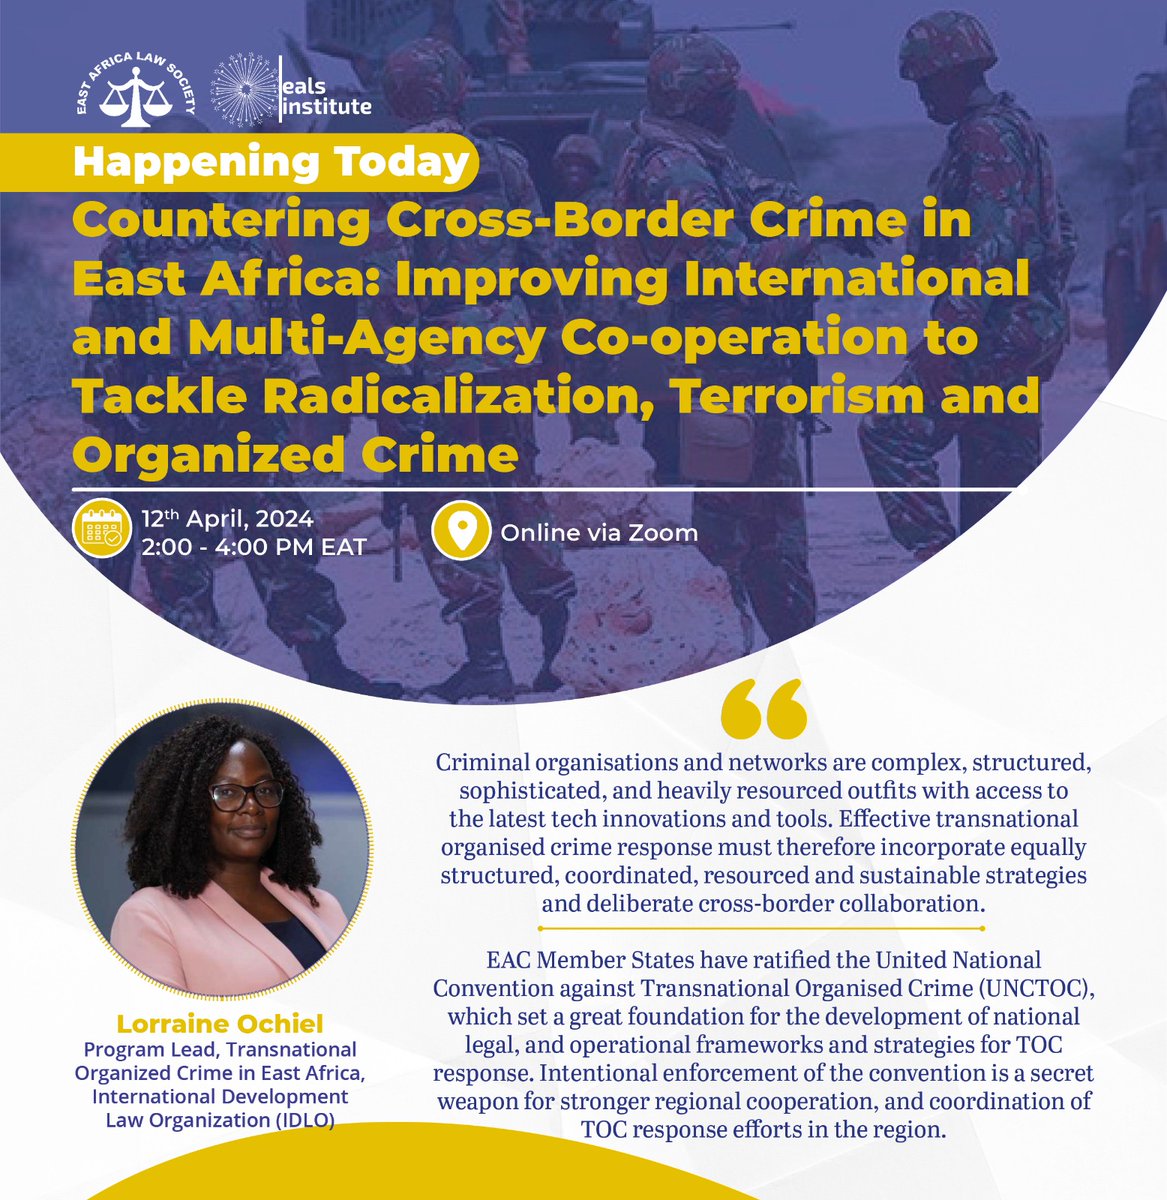 The depth of gratitude we feel towards our panelists for shedding light on the complexities of encountering cross-border crime in East Africa is immeasurable. Thank you for your contributions.